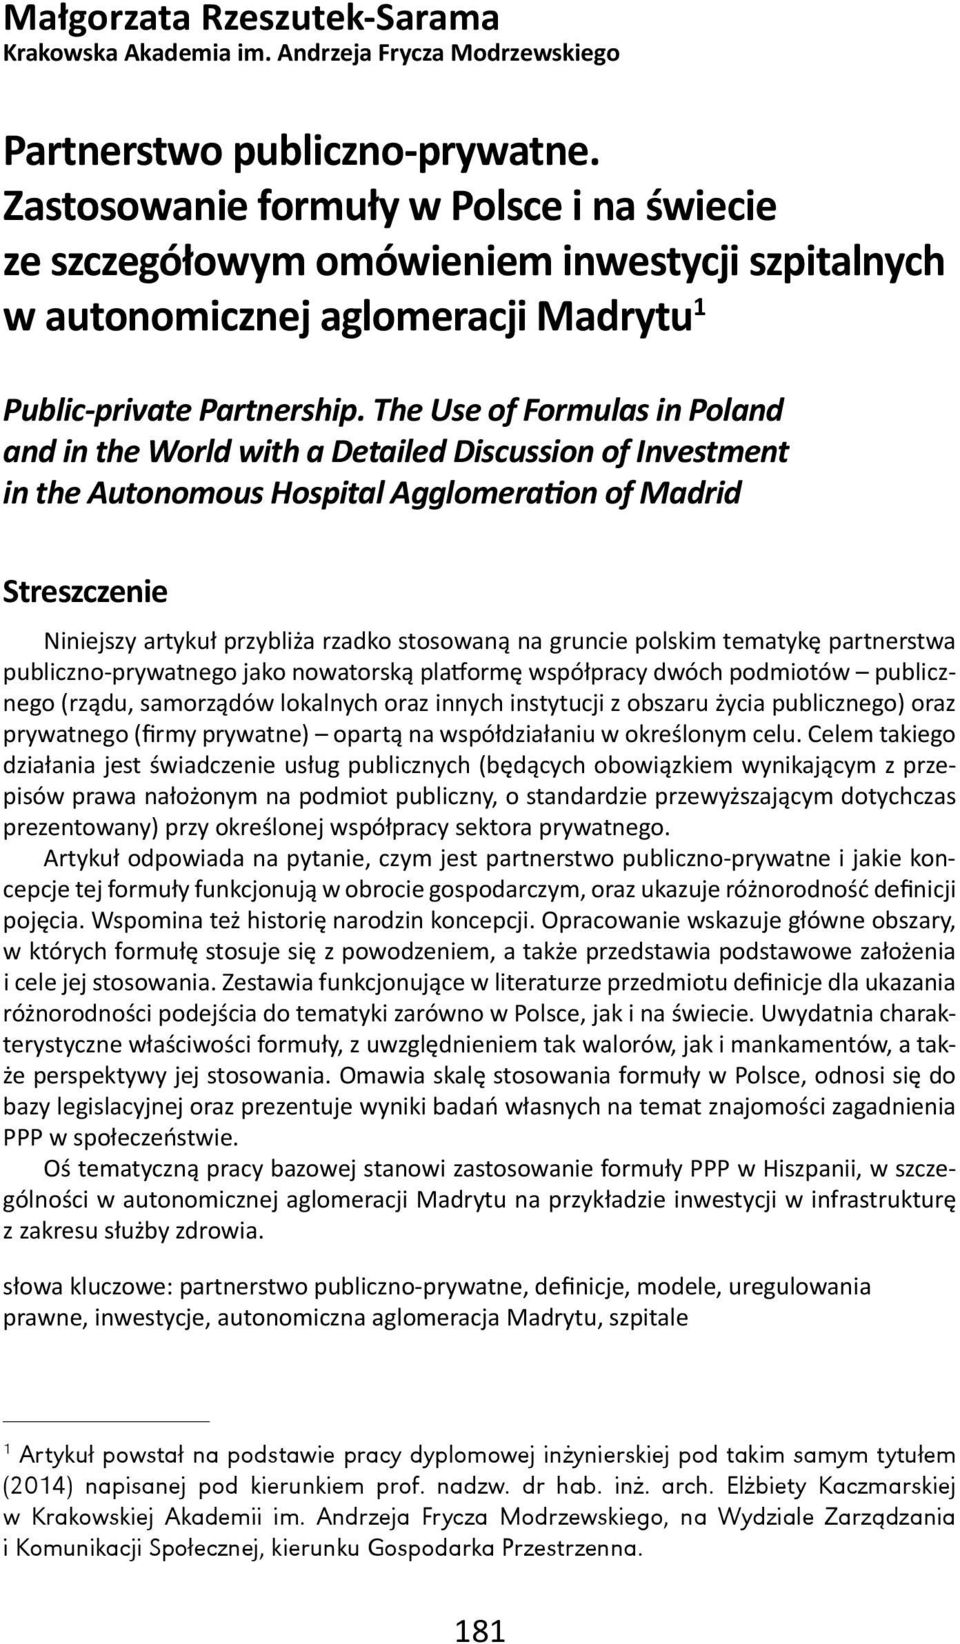 The Use of Formulas in Poland and in the World with a Detailed Discussion of Investment in the Autonomous Hospital Agglomera on of Madrid Streszczenie Niniejszy artykuł przybliża rzadko stosowaną na